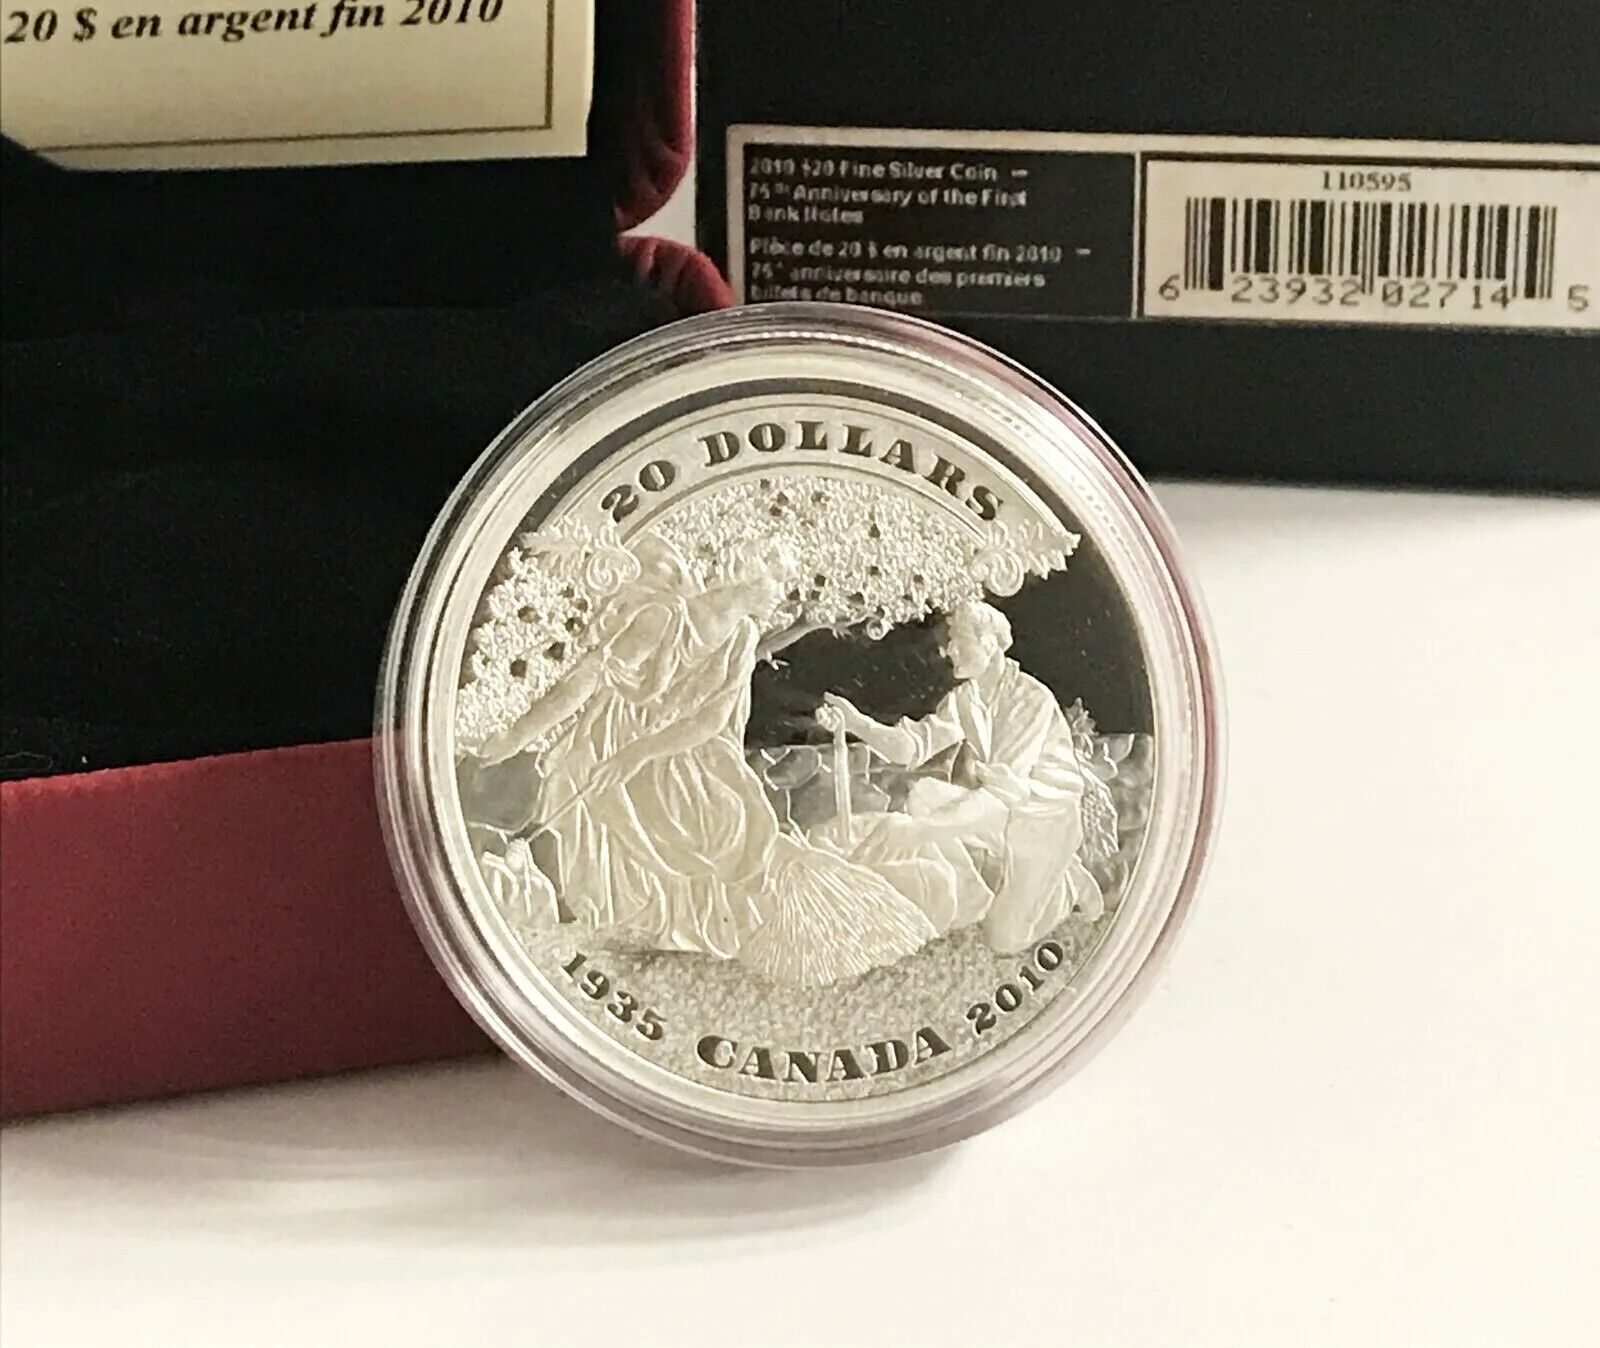 1 Oz Silver Coin 2010 Canada $20 Proof 75th Anniversary of the first Bank Notes-classypw.com-3